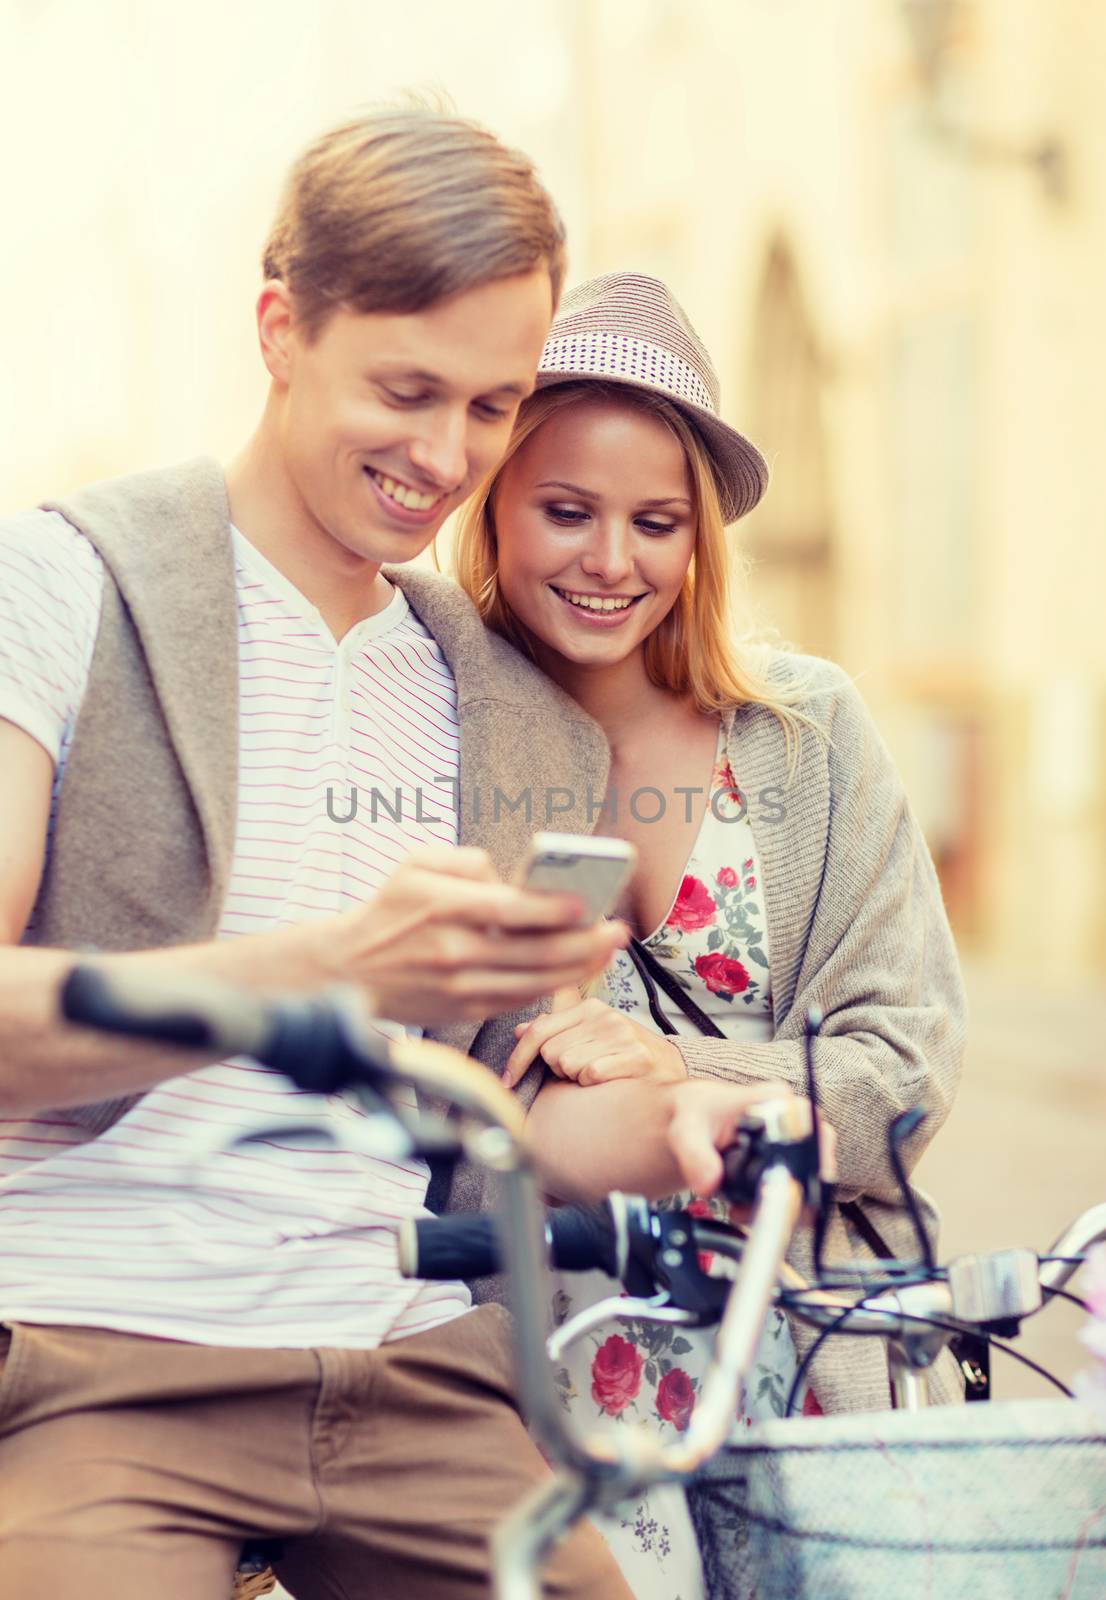 summer holidays, apps and dating concept - couple with bicycles and smartphone in the city